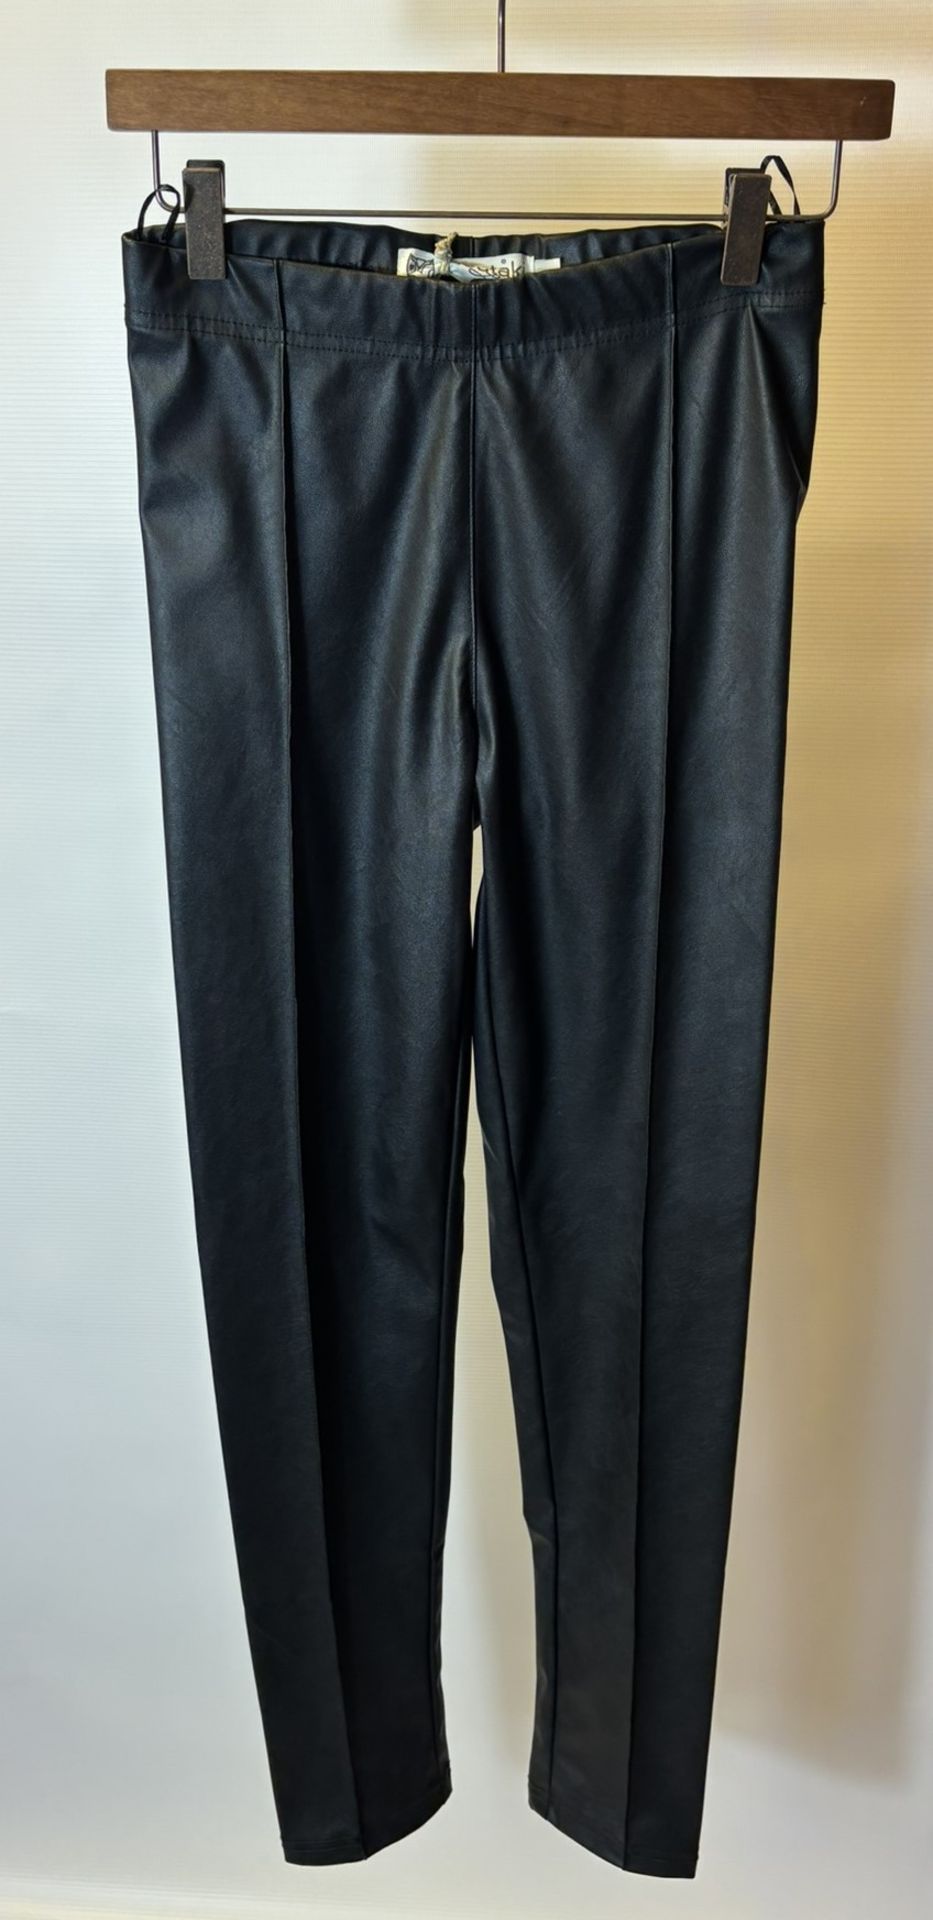 12 x Various Pairs Of Women's Pants As Seen In Photos - Image 13 of 37